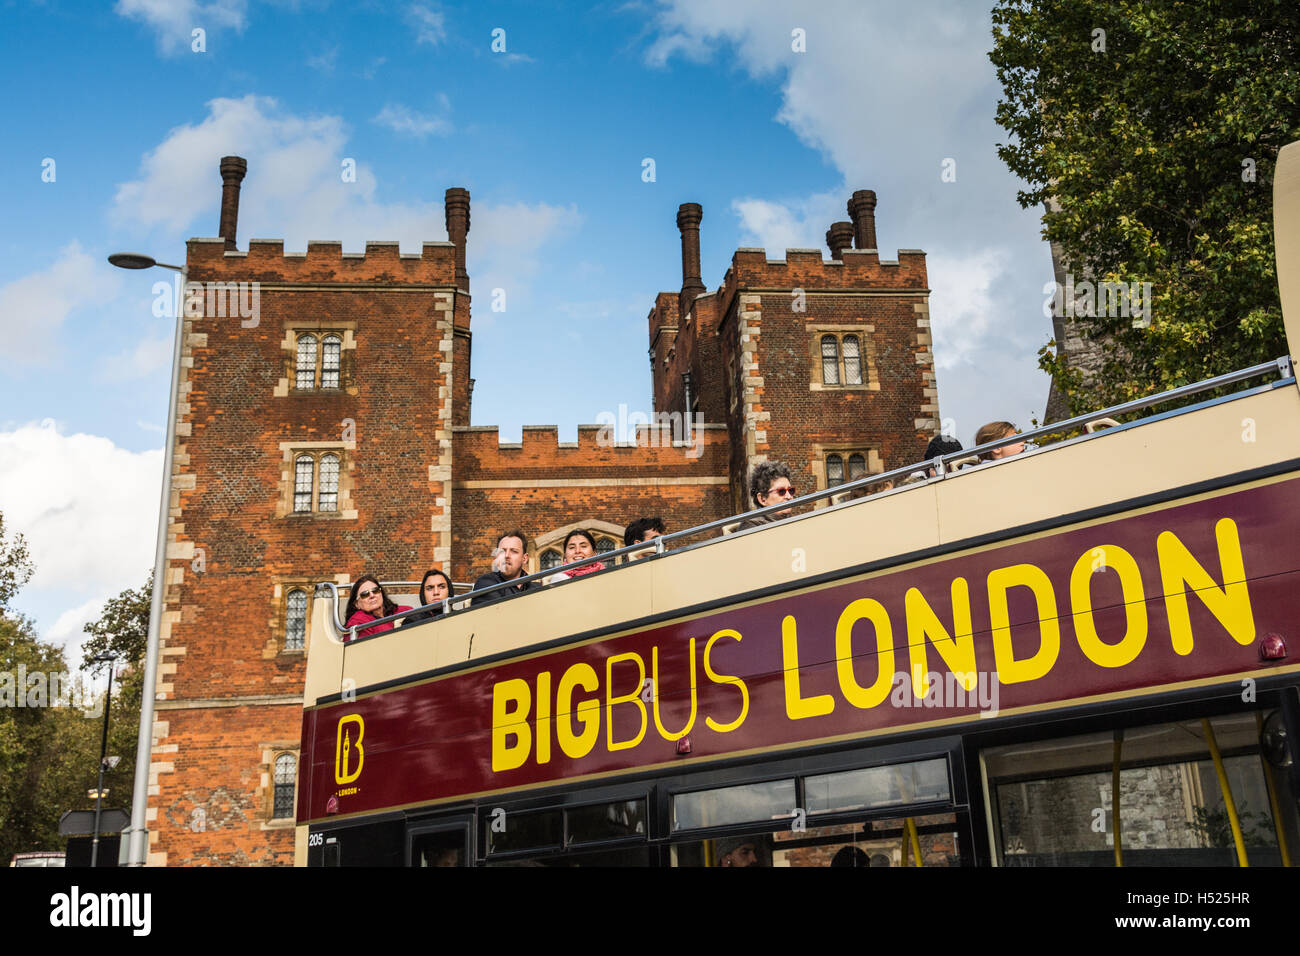 A Big Bus London tourist bus passes in front of Lambeth Palace, the official London Residence of The Archbishop of Canterbury, London, England, U.K. Stock Photo